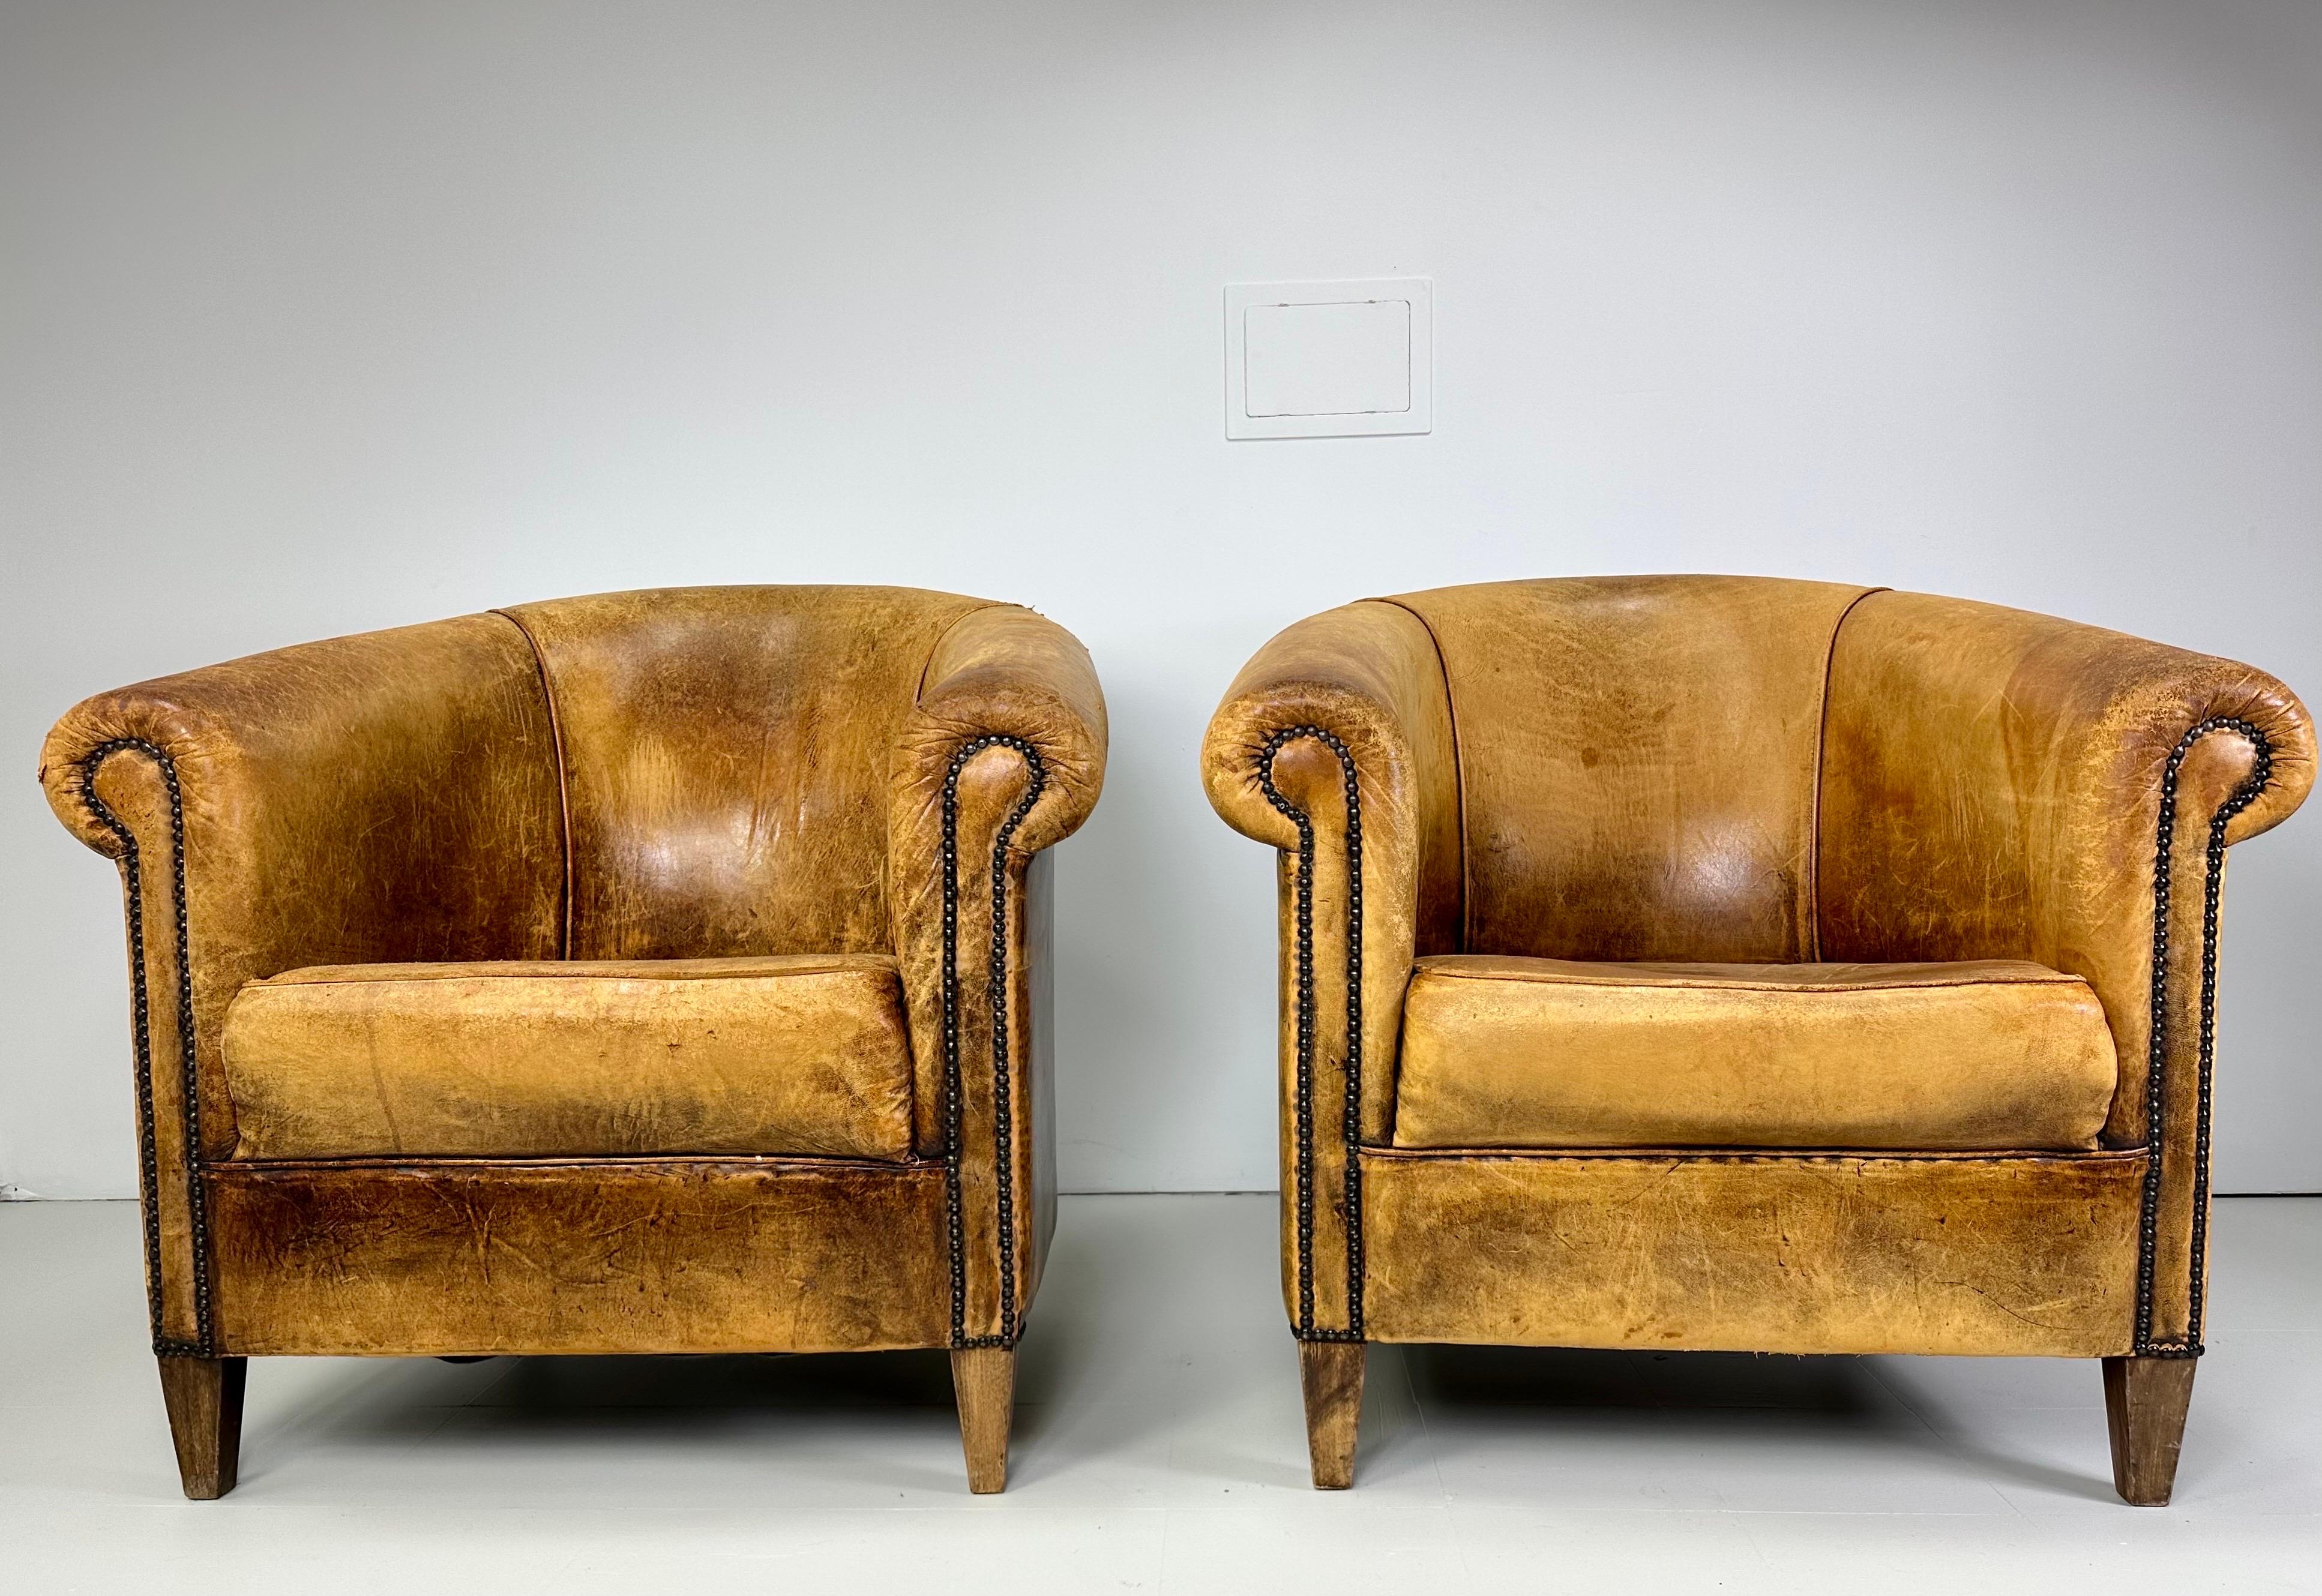 Early 20th Century Leather Club Chairs. Original cognac leather shows a well aged patina. Nail head details. Wood legs.

Delivery to NYC available for $425